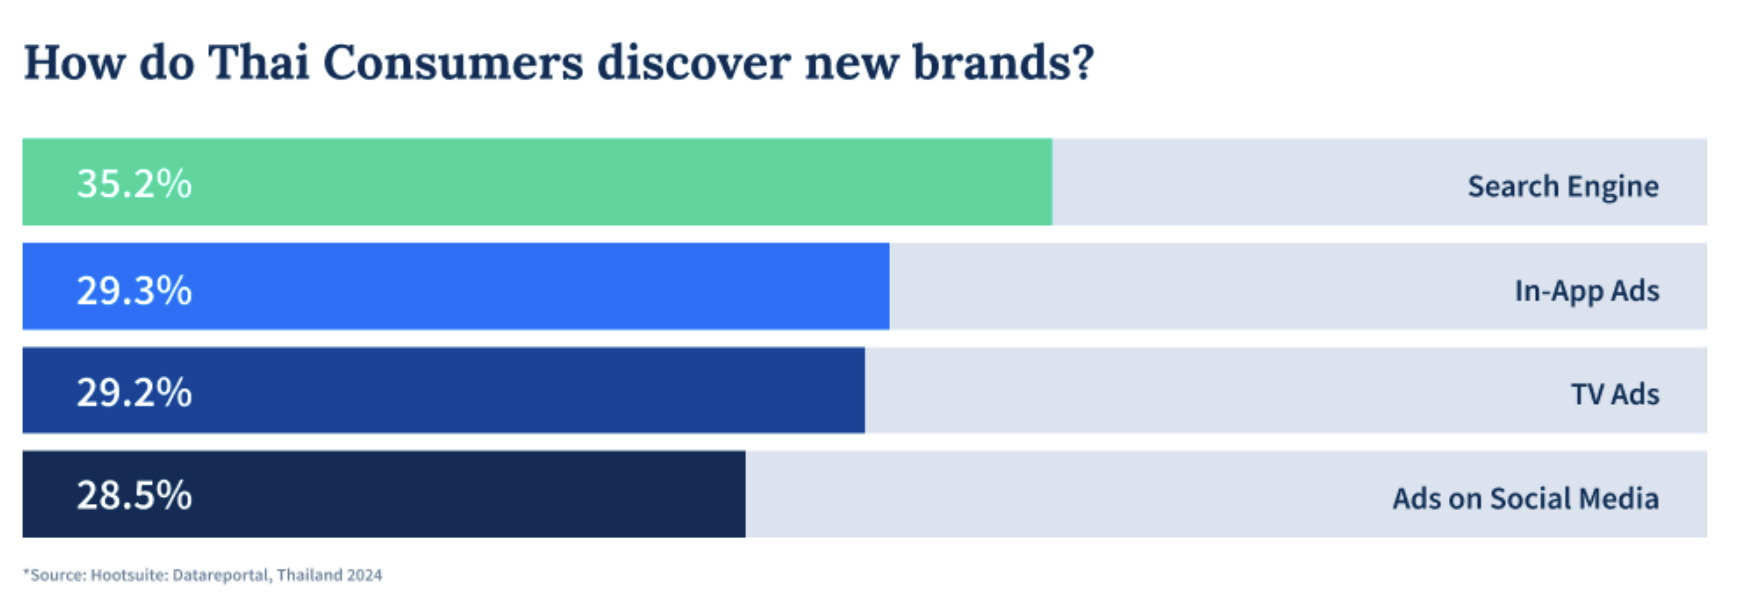 brand discovery in thailand 2024